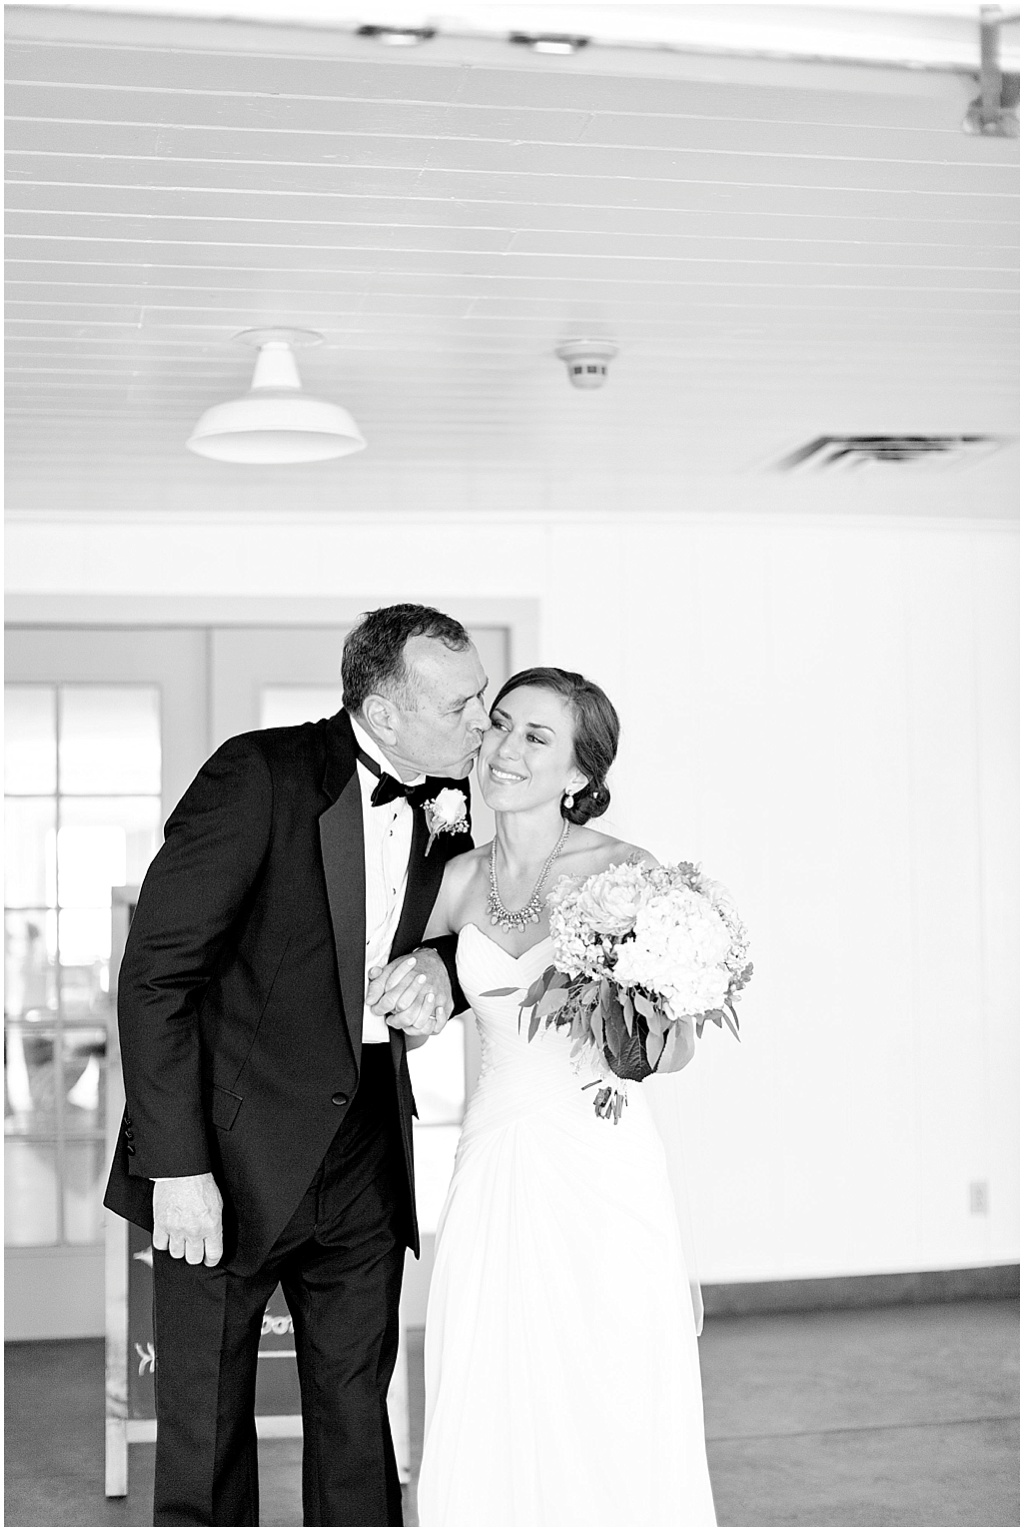 View More: http://maryfieldsphotography.pass.us/hotz-wedding-5-19-15